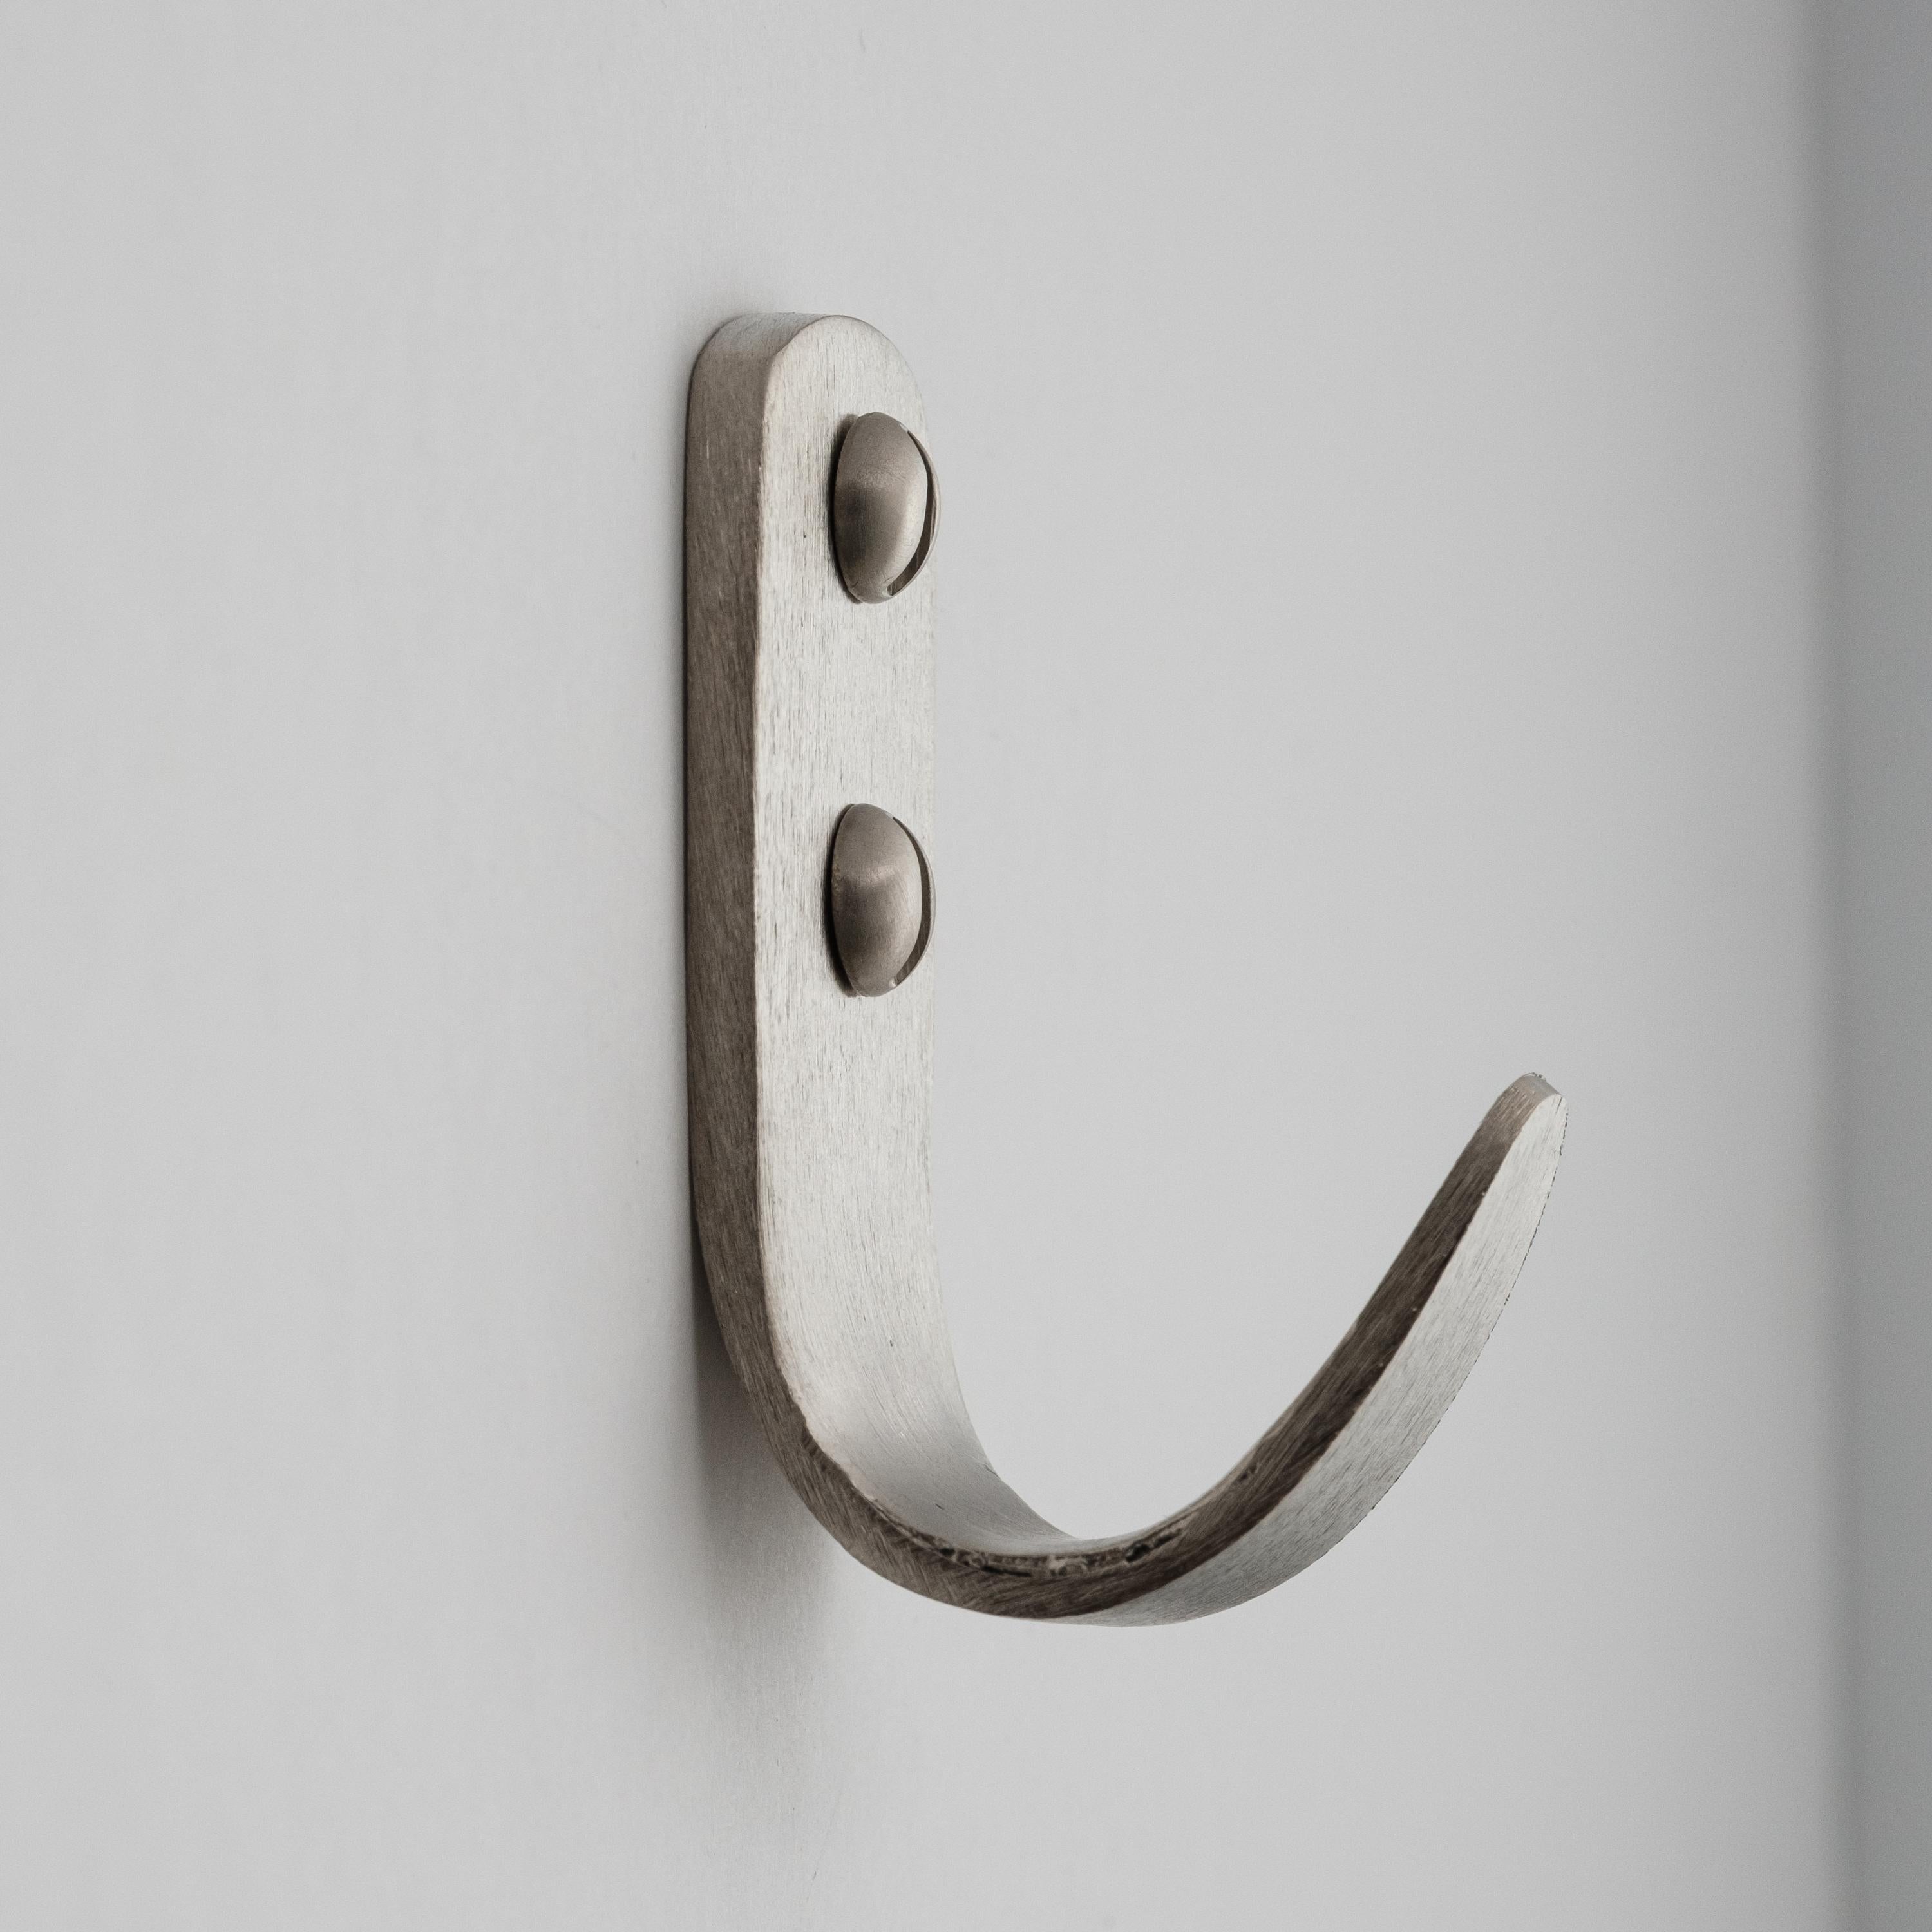 Carl Auböck model #4330/1 hook in nickel. Designed in the 1950s, this versatile and Minimalist Viennese hook is executed in softly brushed nickel by Werkstätte Carl Auböck, Austria. 

Produced by Carl Auböck IV in the original Auböck workshop in the